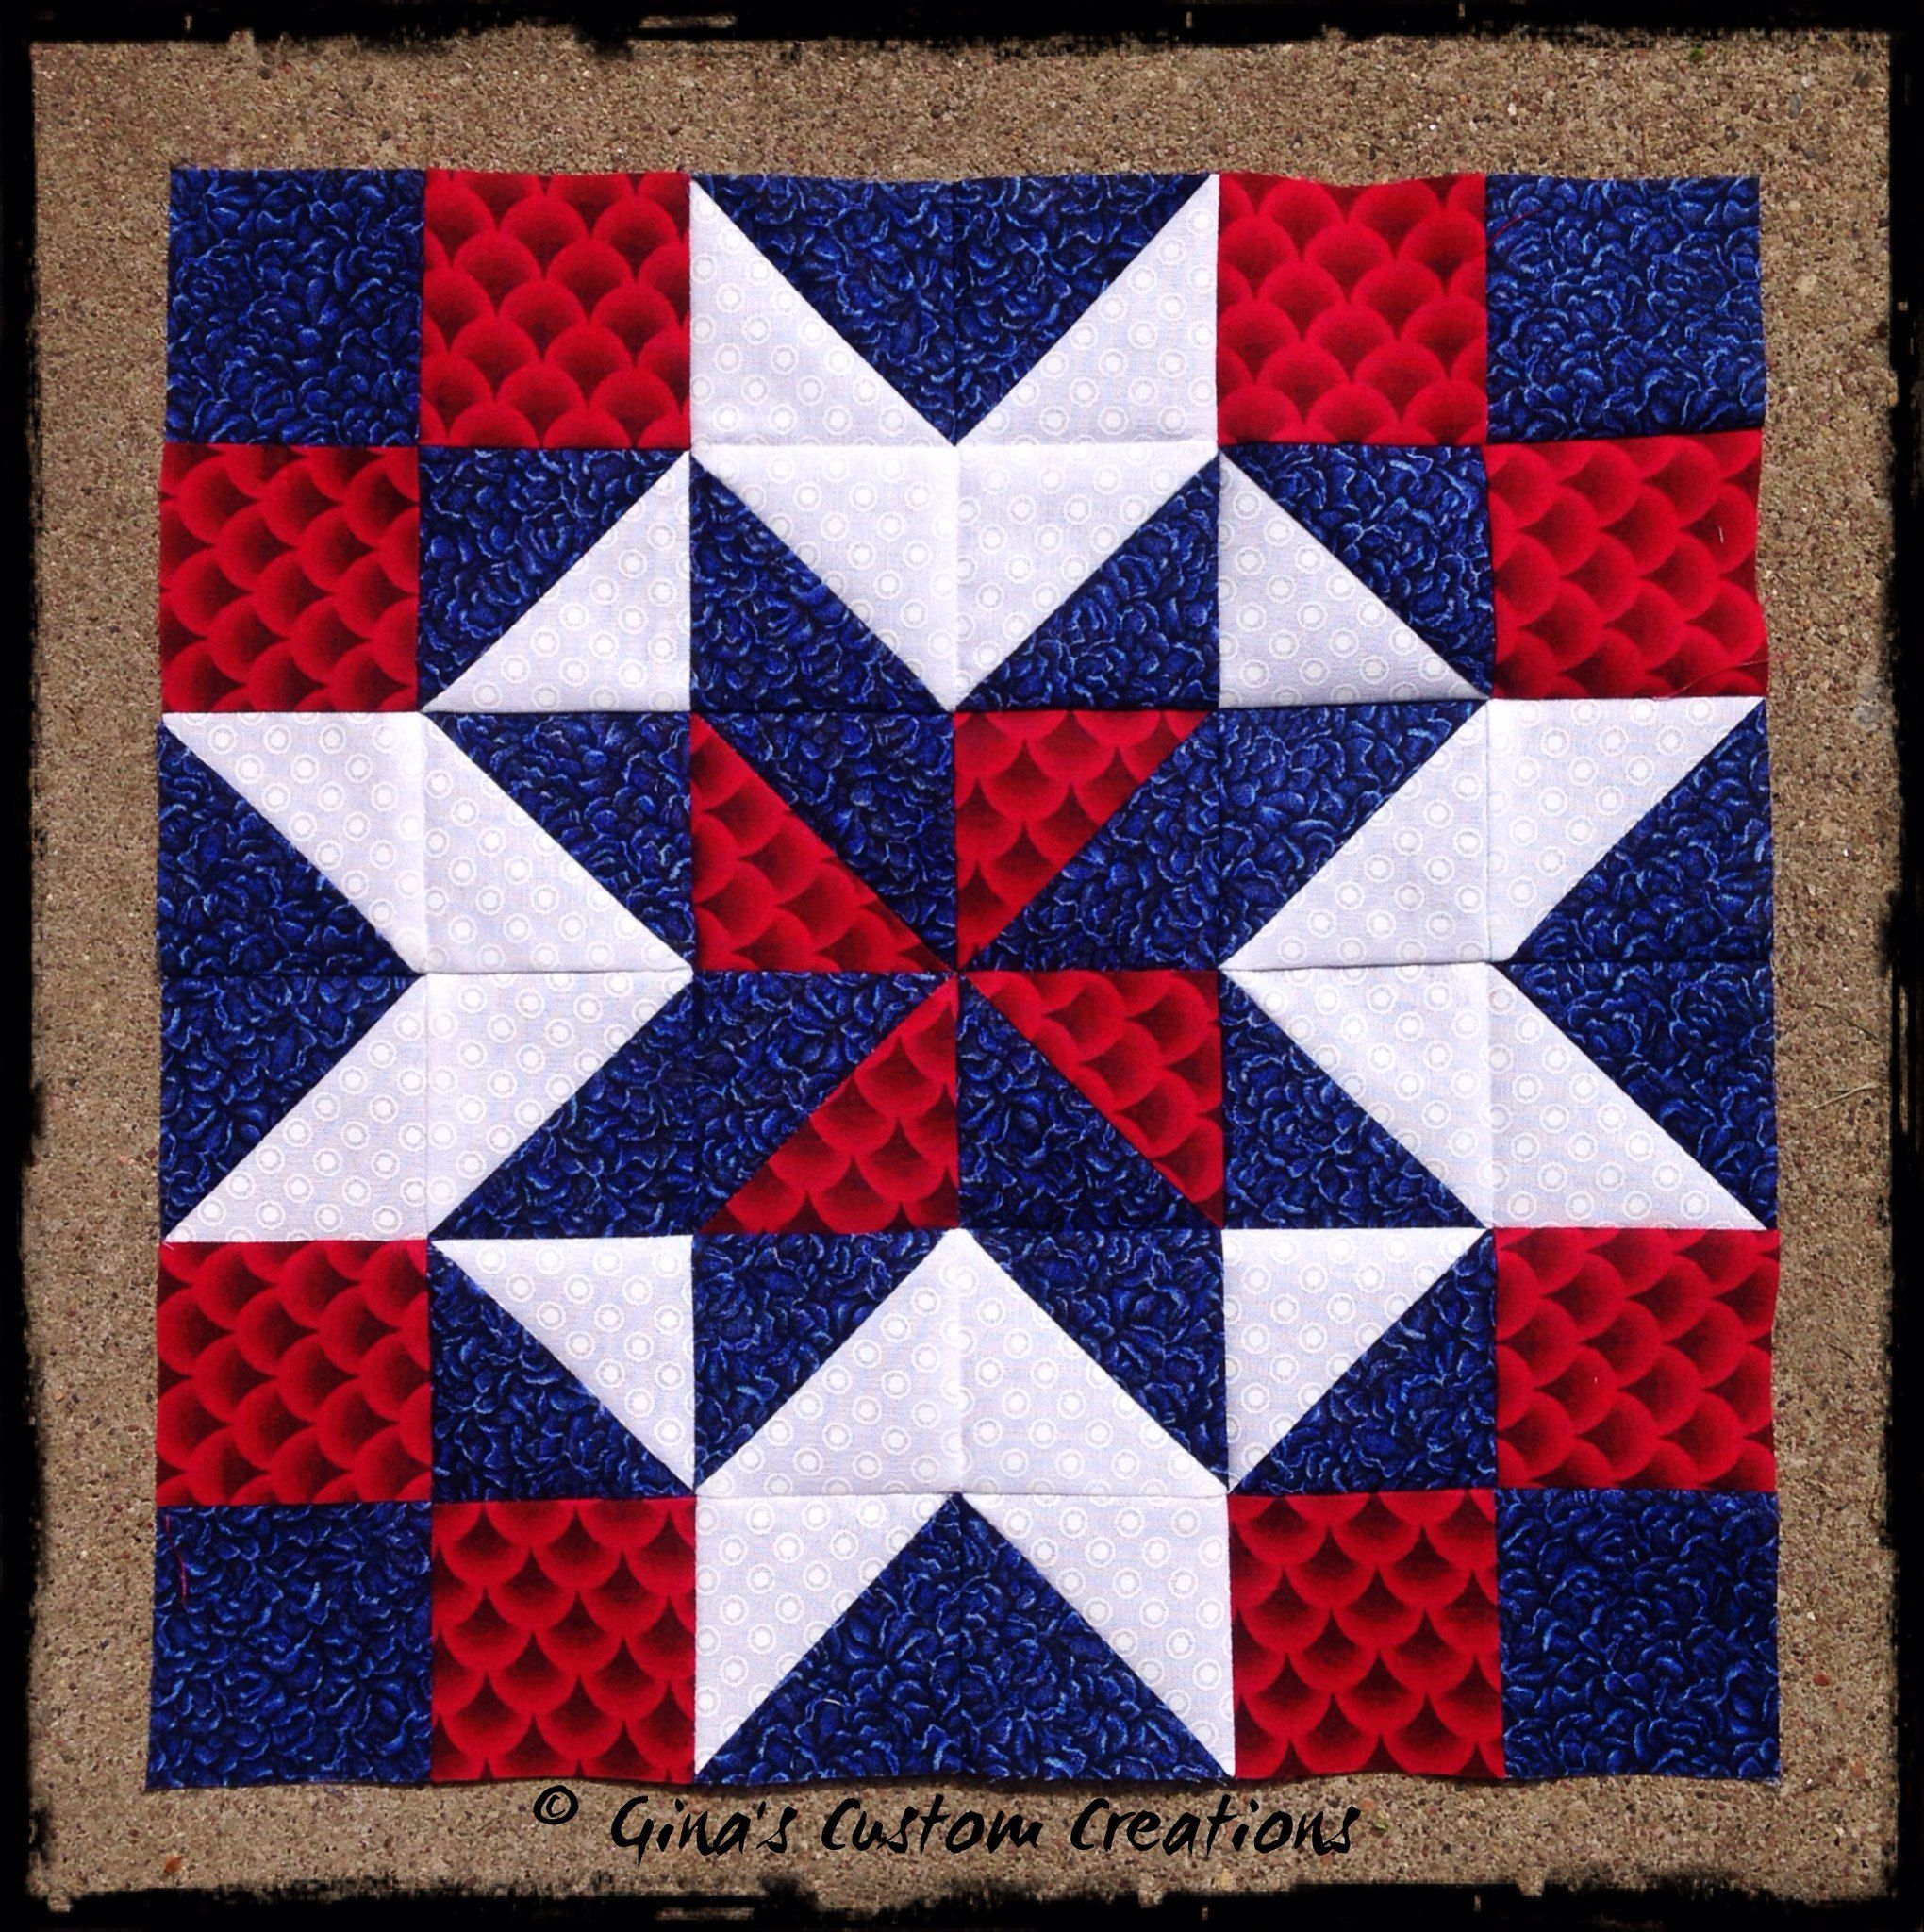 Another Nine Patch Star Block Star Quilt Patterns Barn Quilt